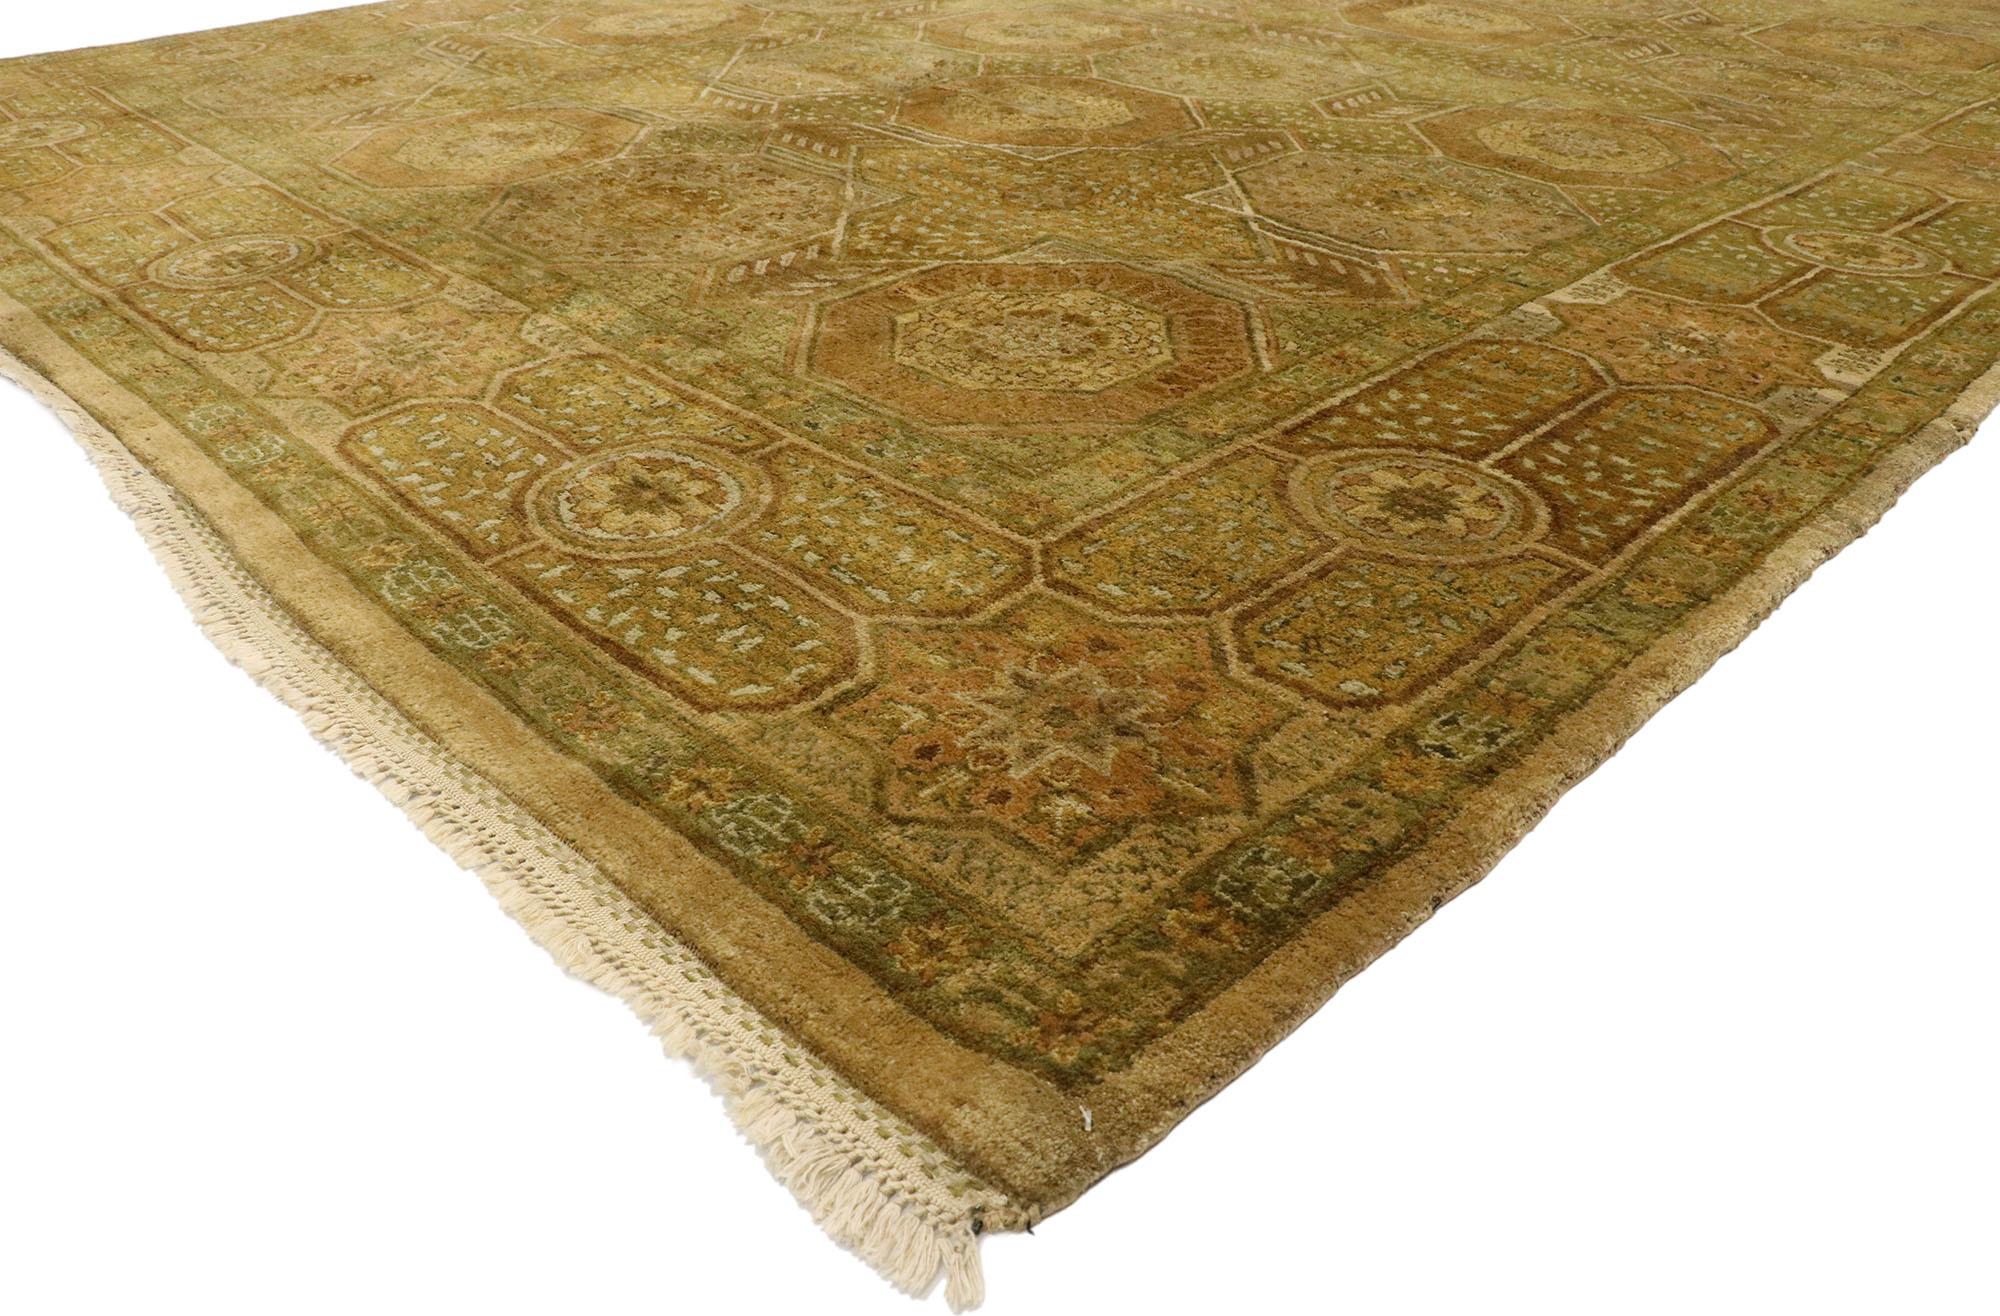 77573, vintage Indian rug with Modern Shaker style and Islamic Tile Design. With luminous brown hues and ornate details, this hand knotted wool vintage Indian rug beautifully embodies Modern Shaker style. The field is covered in a well-balanced